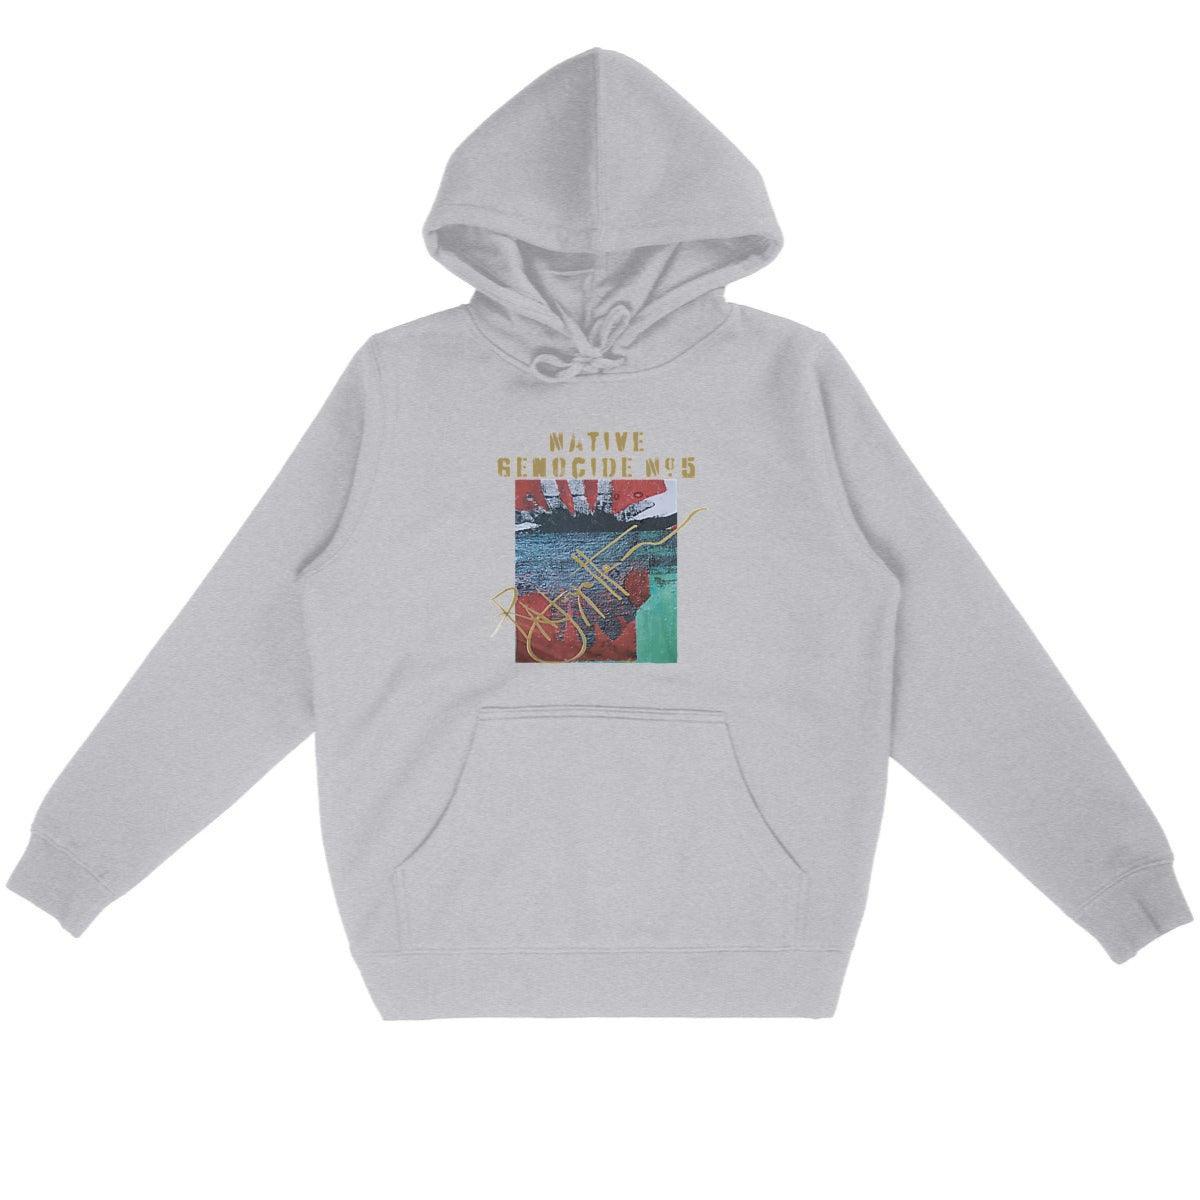 Native Genocide #5 Premium Lightweight Straight Cut Unisex Hoodie, designed by Tree of Life Art, combines comfort with a commitment to raising awareness for indigenous issues.